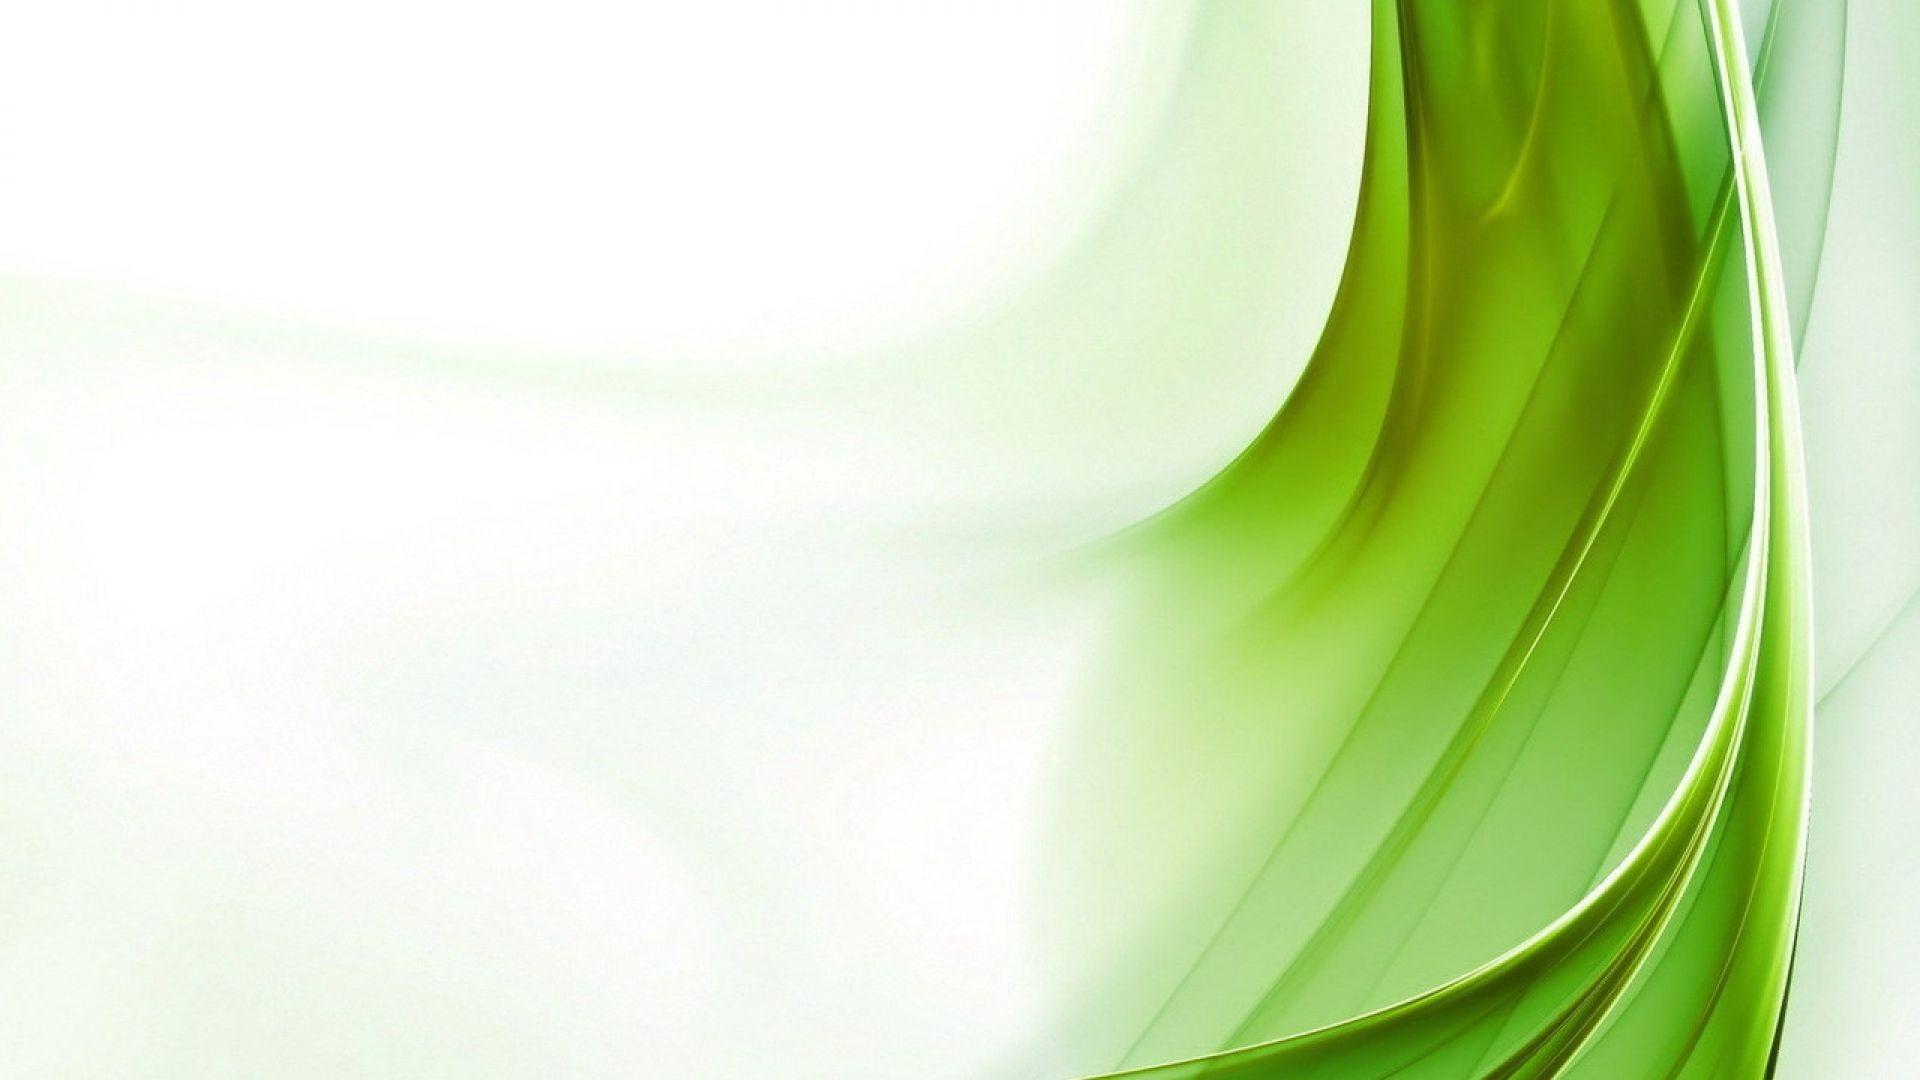 Download Wallpaper 1920x1080 abstraction, green, white, line Full HD